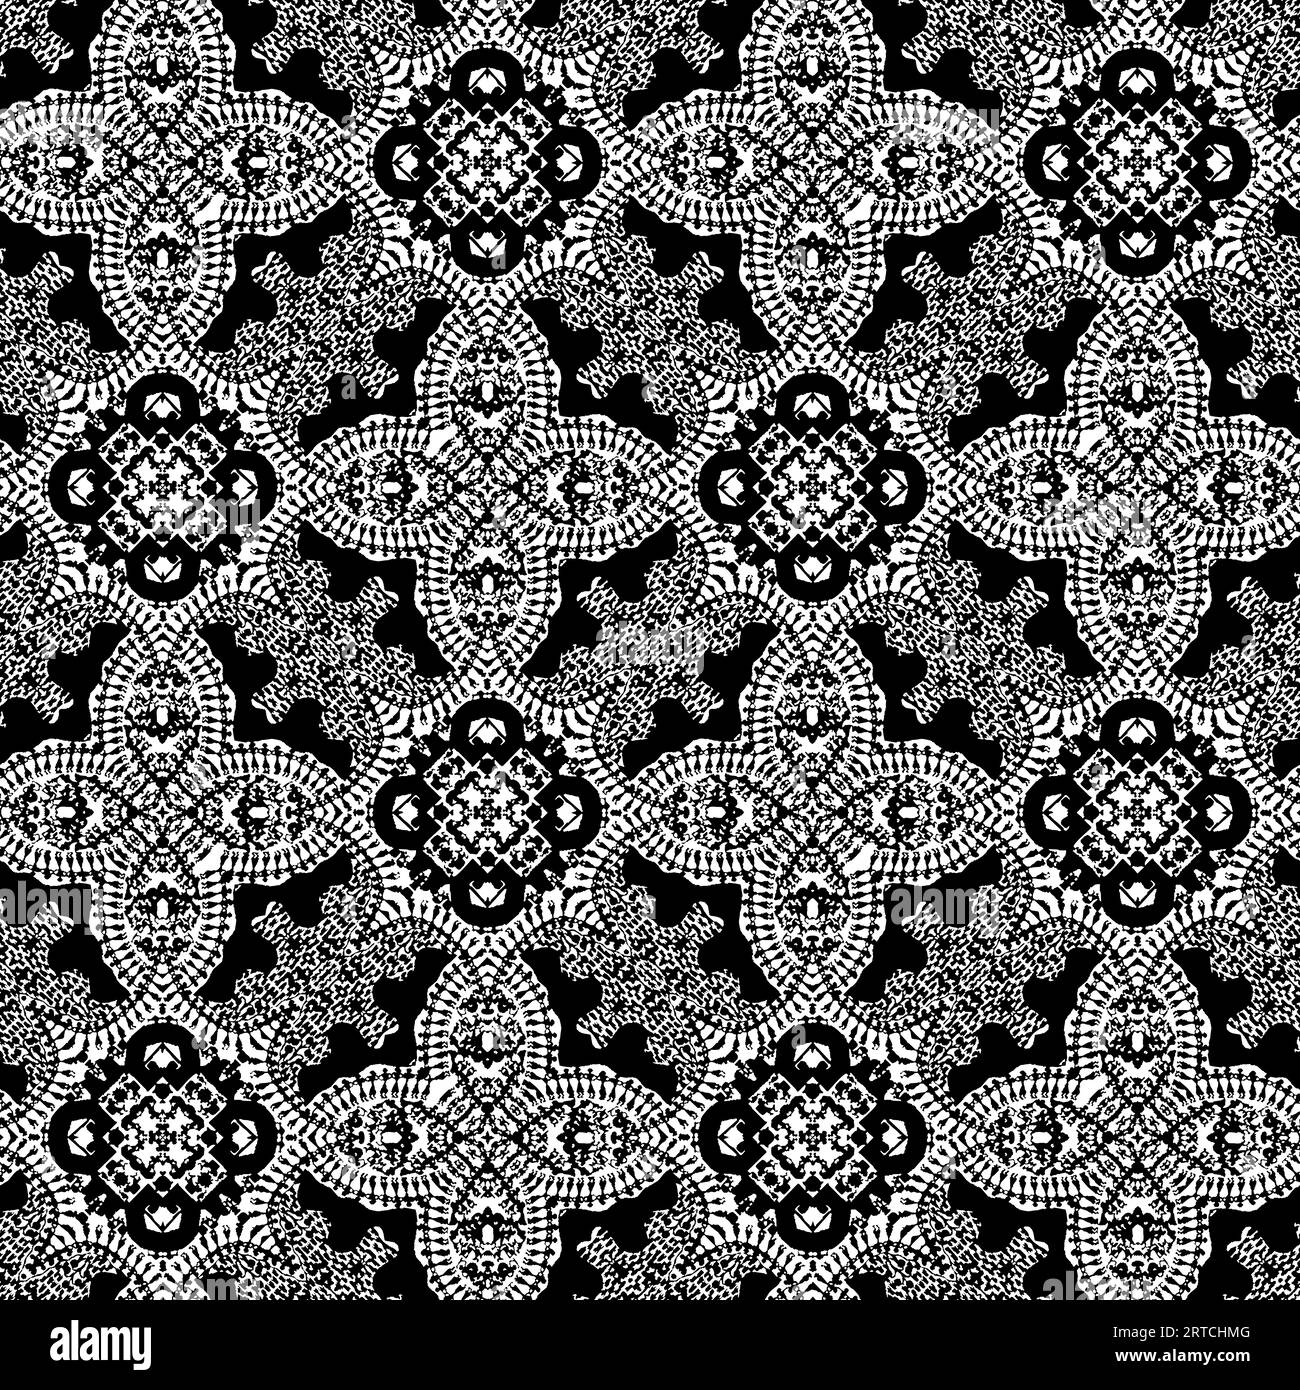 Seamless pattern with lace motifs in black and white Stock Photo - Alamy